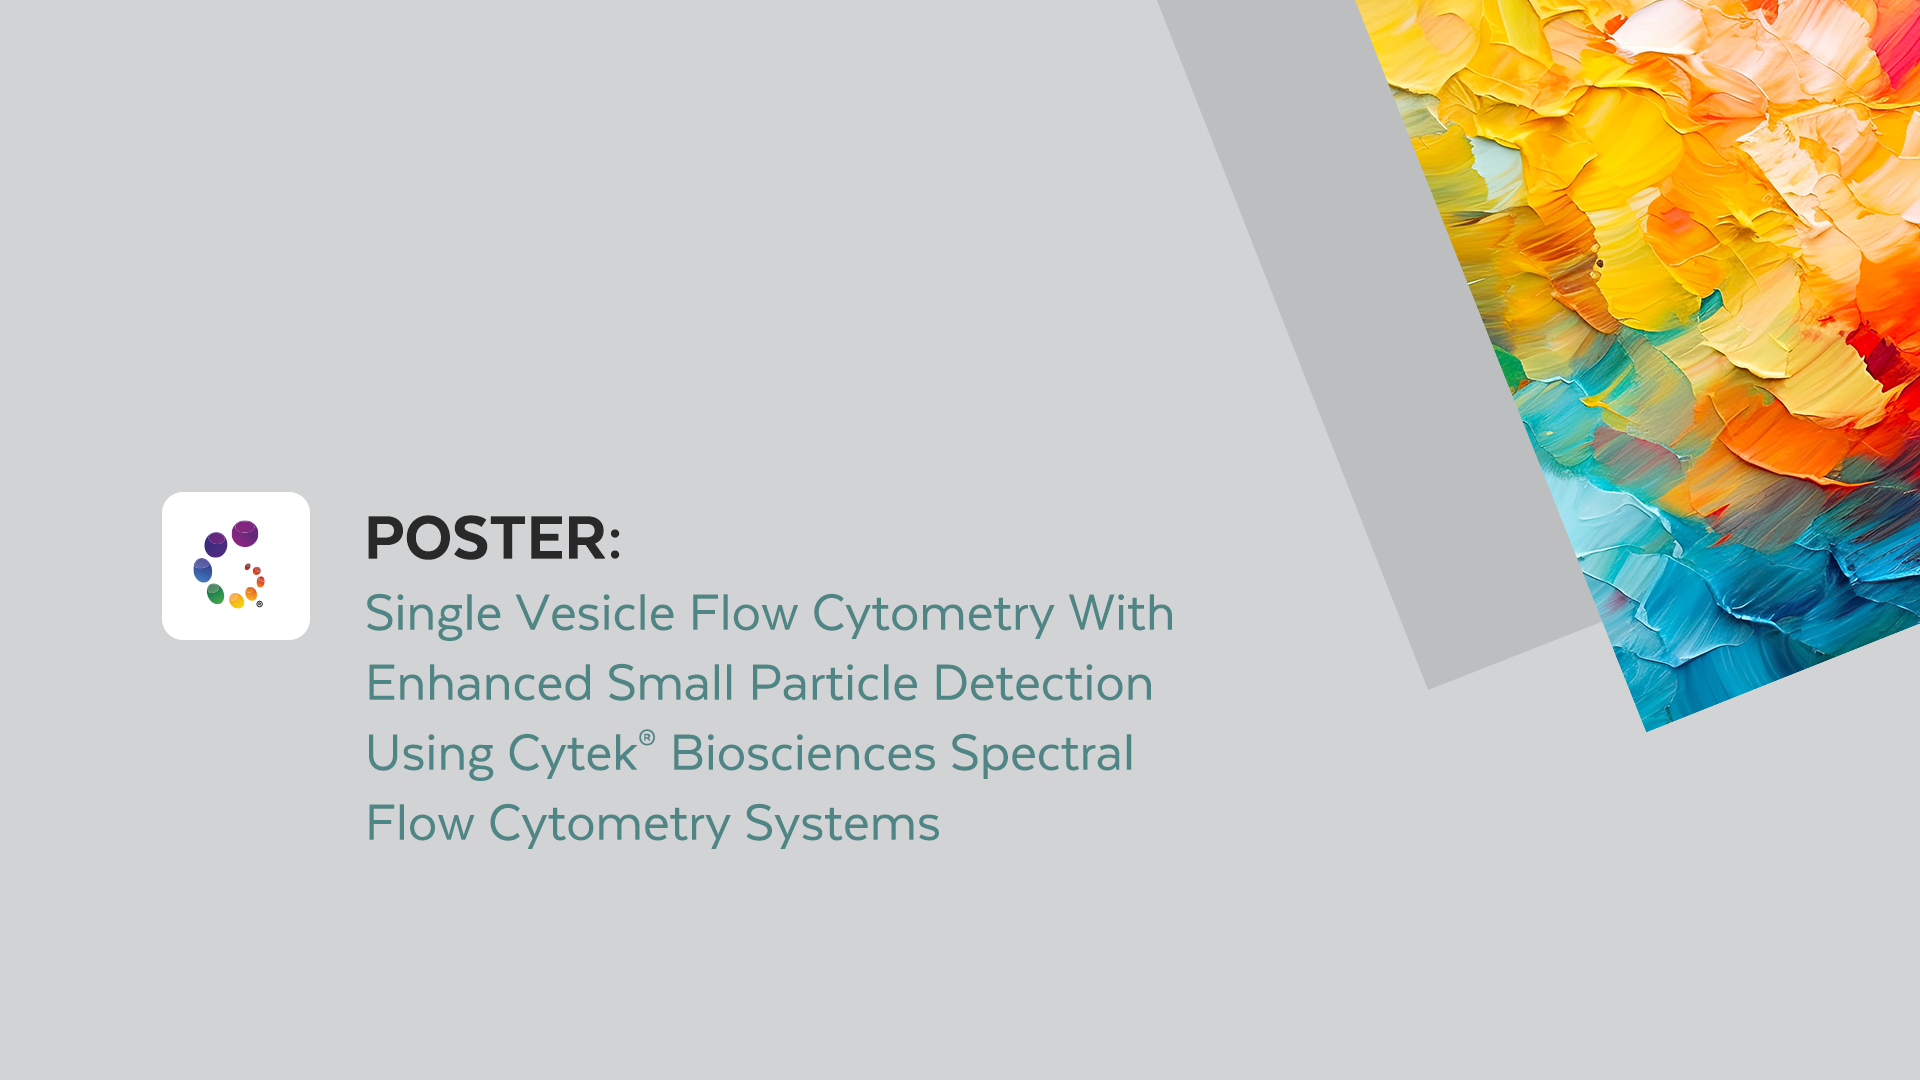 Thumbnail_Single Vesicle Flow Cytometry With Enhanced Small Particle Detection Using Cytek Biosciences Spectral Flow Cytometry Systems